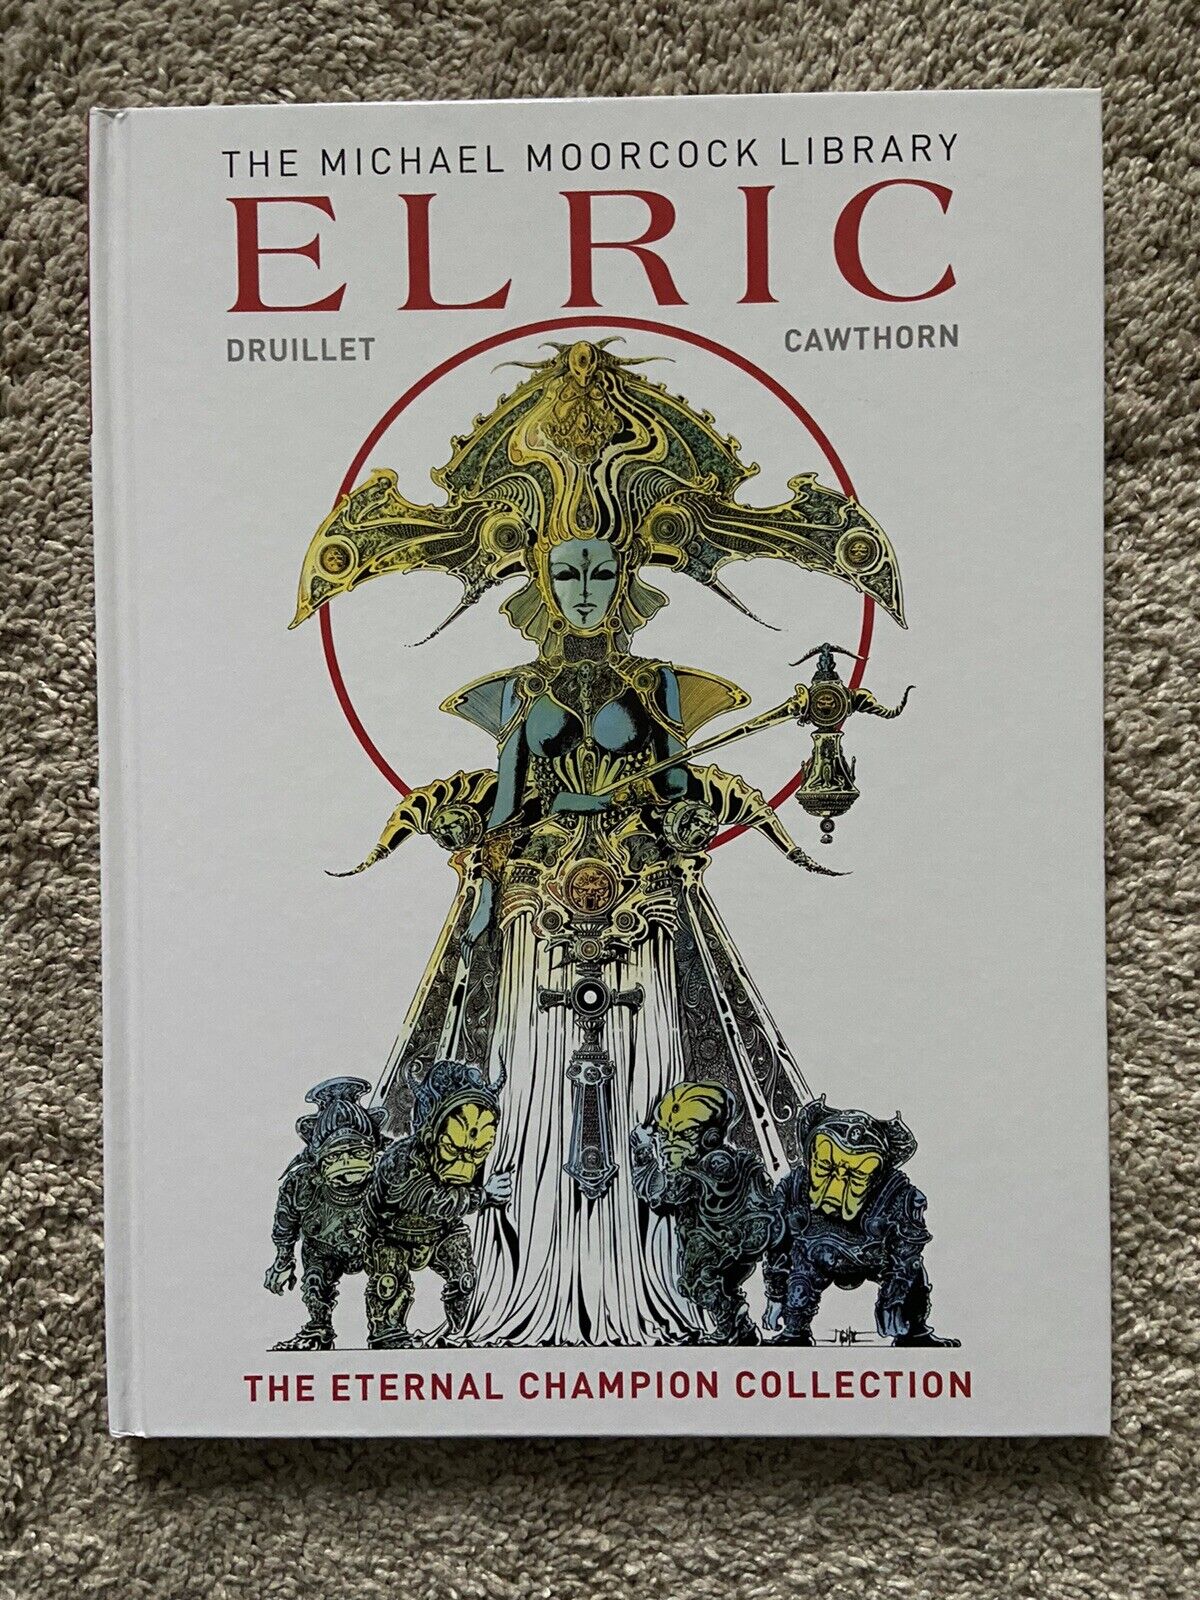 ELRIC - The Michael Moorcock Library - The Eternal Champion Collection